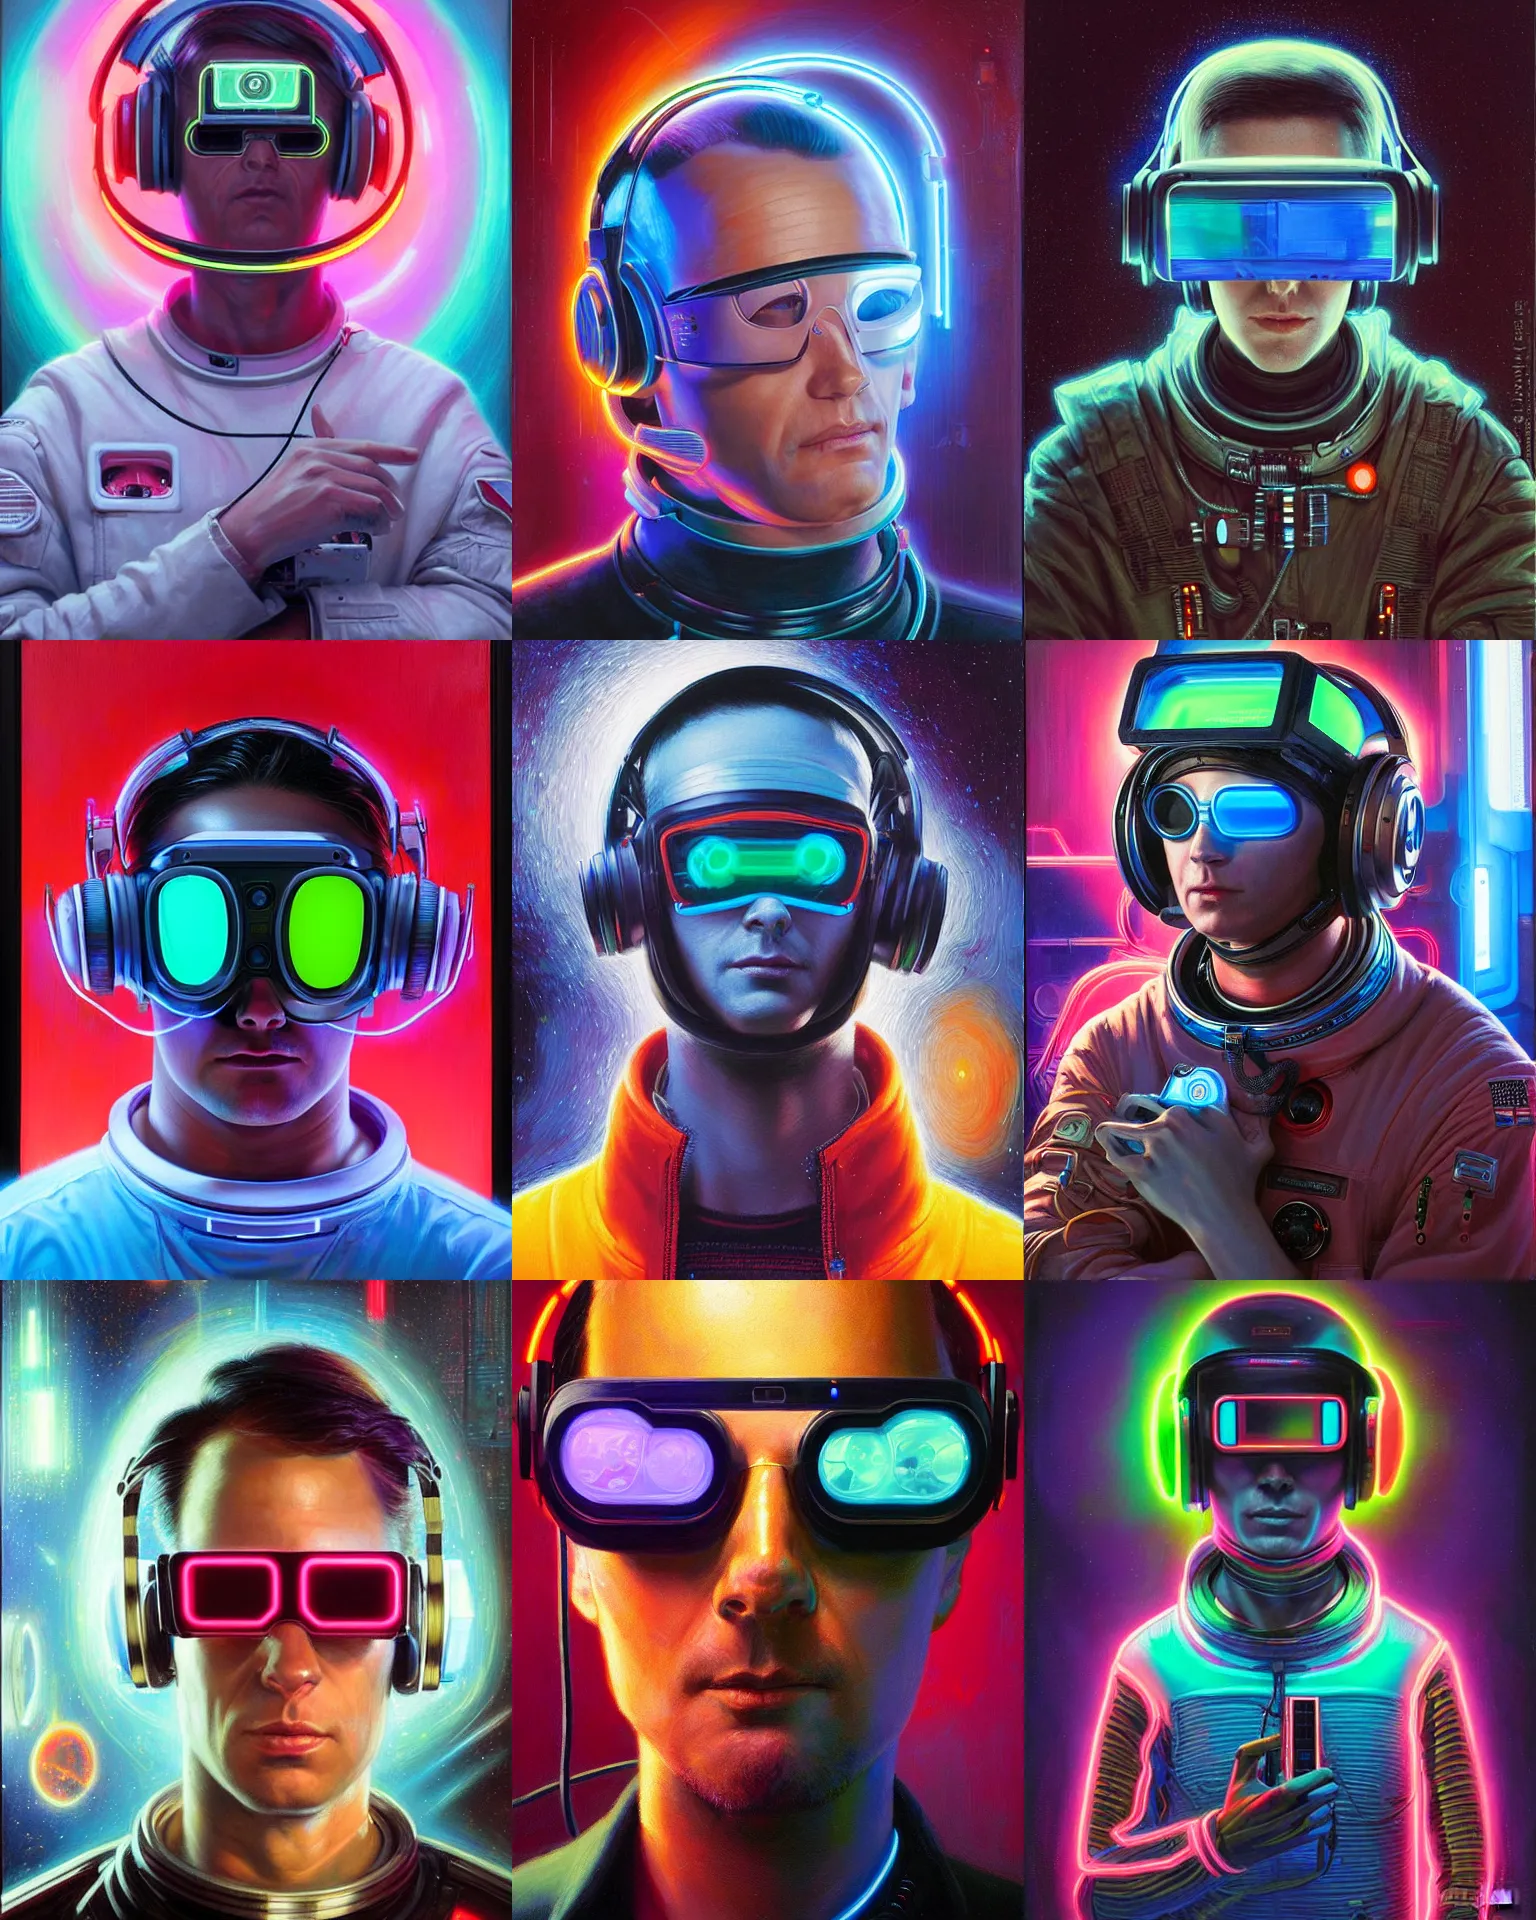 Prompt: neon cyberpunk programmer with laser visor over eyes and sleek headphones headshot desaturated portrait painting by donato giancola, dean cornwall, rhads, tom whalen, alex grey astronaut fashion photography